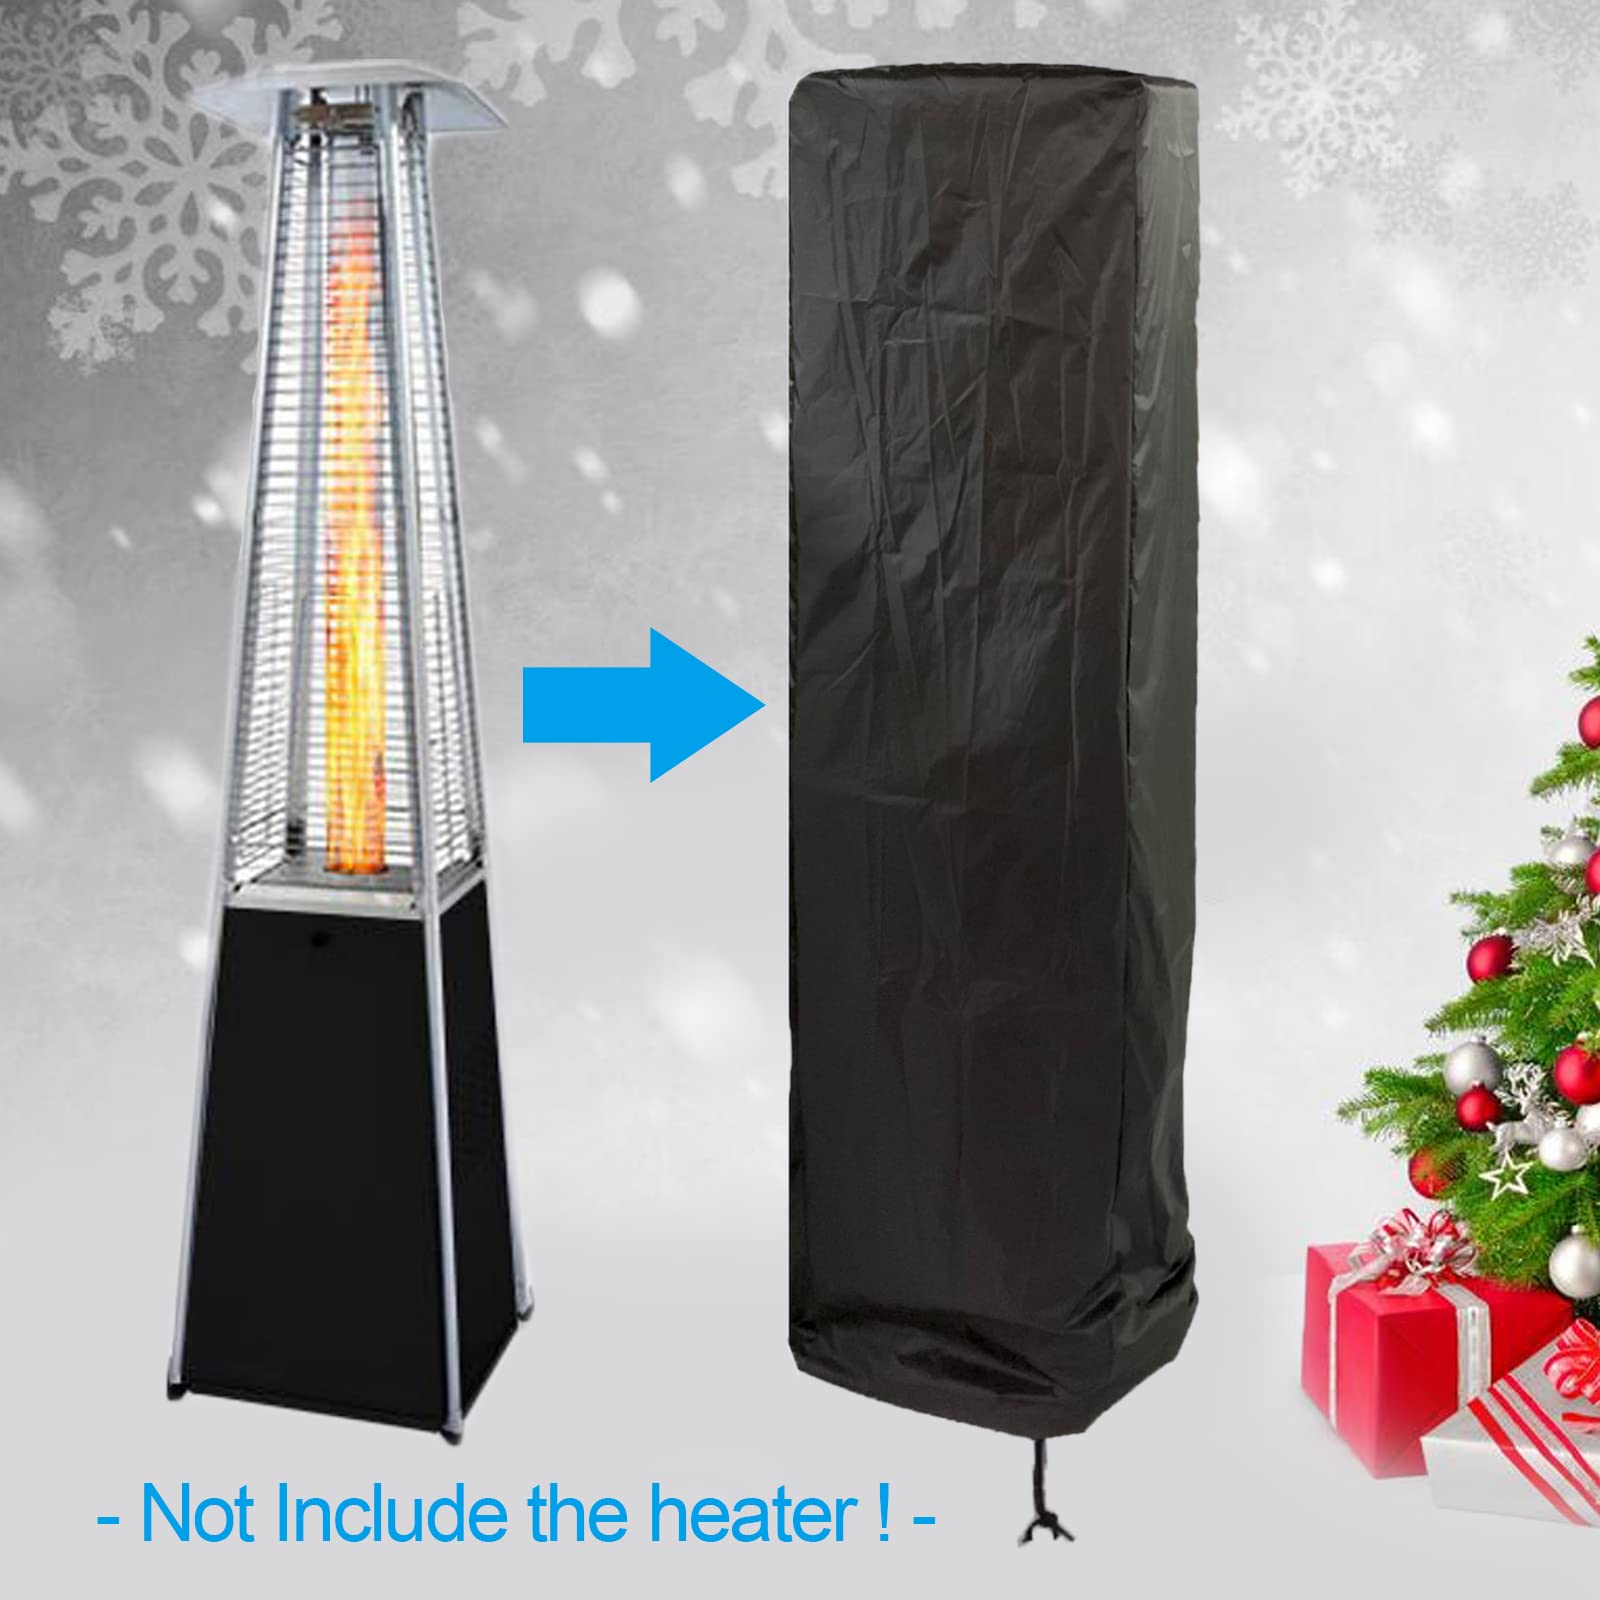 Heavy Duty Glass Tube Heater Cover - Waterproof Square Standing Patio Heater Protector for Outdoor Triangle Heater and Pyramid Torch